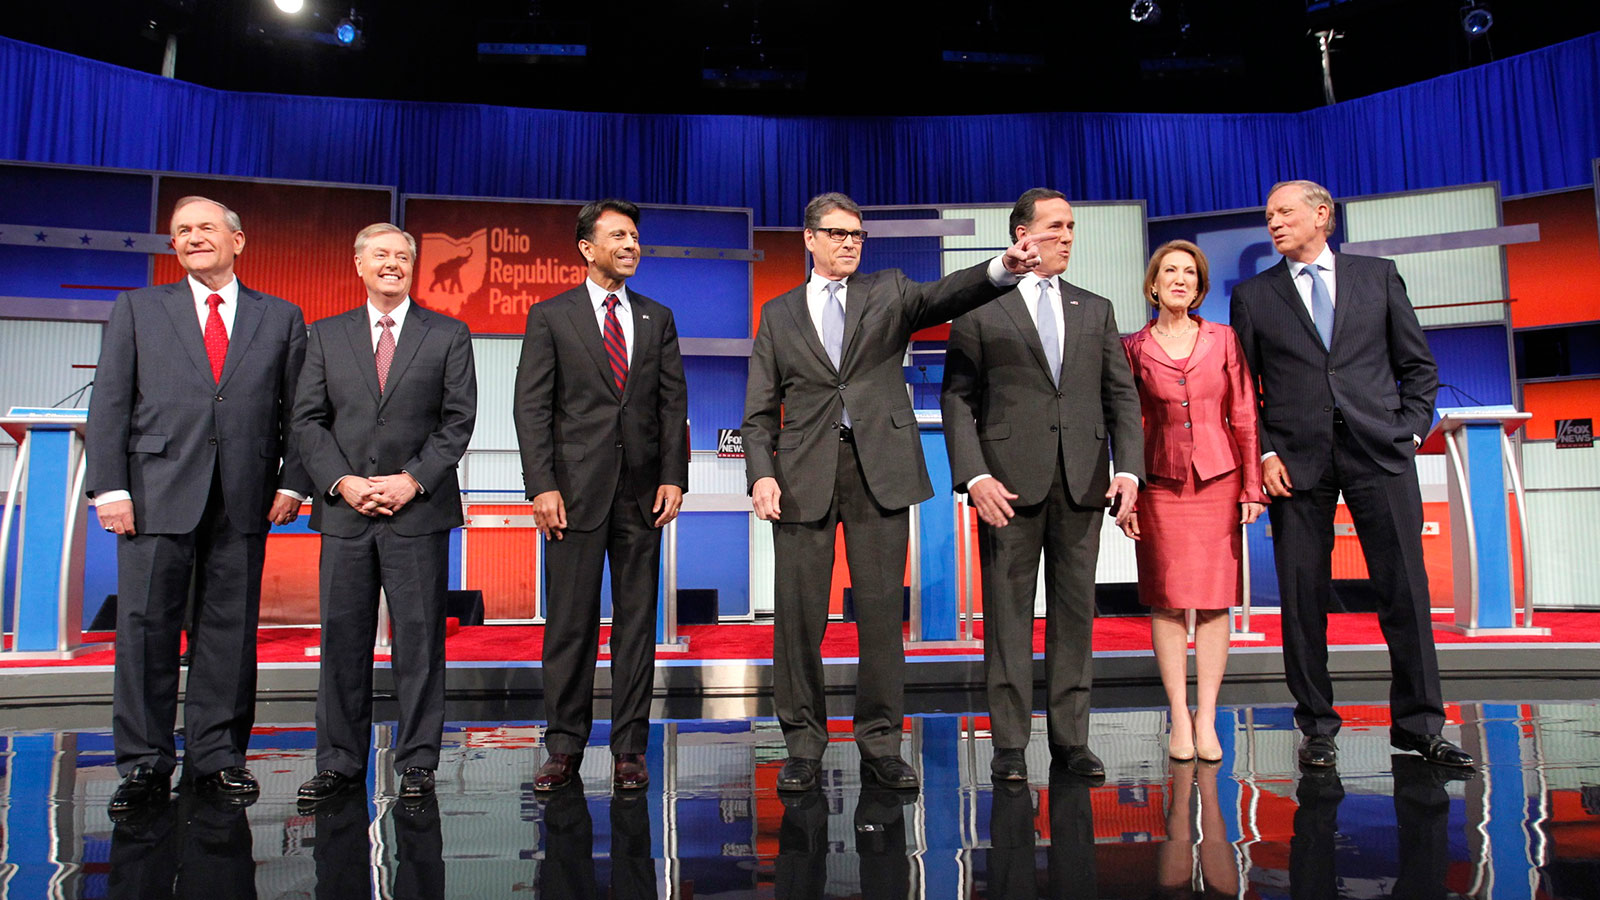 Republican presidential candidates (L-R), former Virginia Governor Jim Gilmore, U.S. Senator Lindsey Graham, Louisiana Governor Bobby Jindal, former Texas Governor Rick Perry, former U.S. Senator Rick Santorum, former HP CEO Carly Fiorina and former New York Governor George Pataki, pose before the start of a Fox-sponsored forum for lower polling candidates held before the first official Republican presidential candidates debate of the 2016 U.S. presidential campaign in Cleveland, Ohio, August 6, 2015.